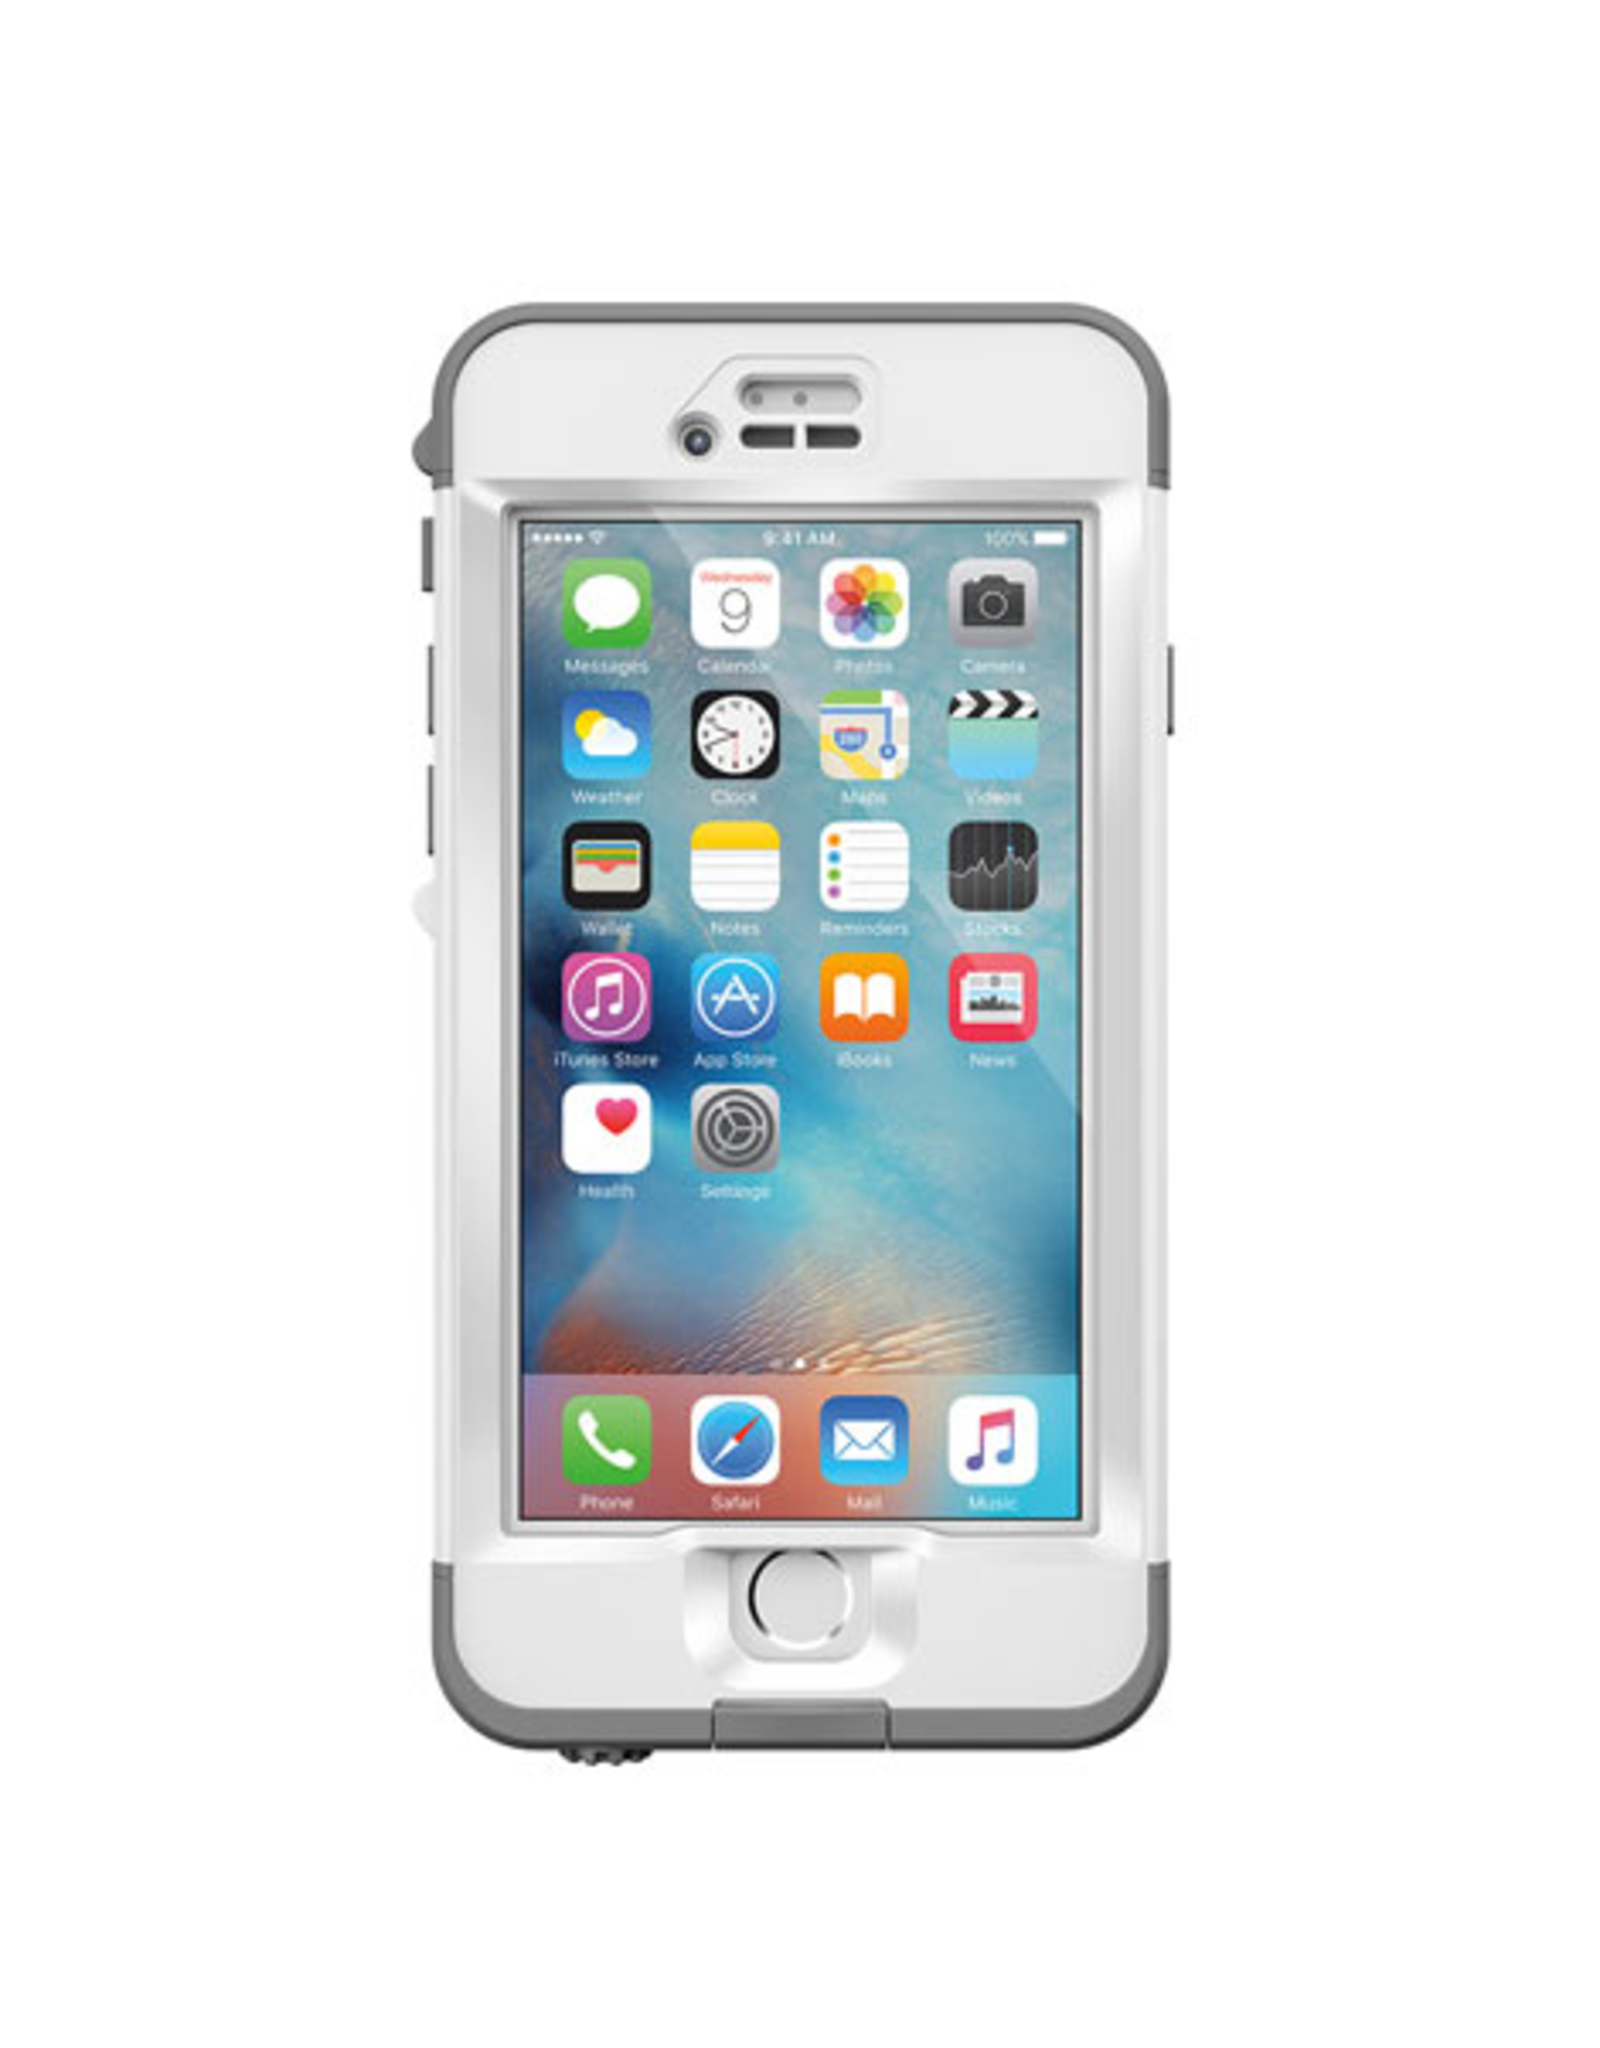 Lifeproof LifeProof Nuud Case suits iPhone 6S Plus - Avalanche White